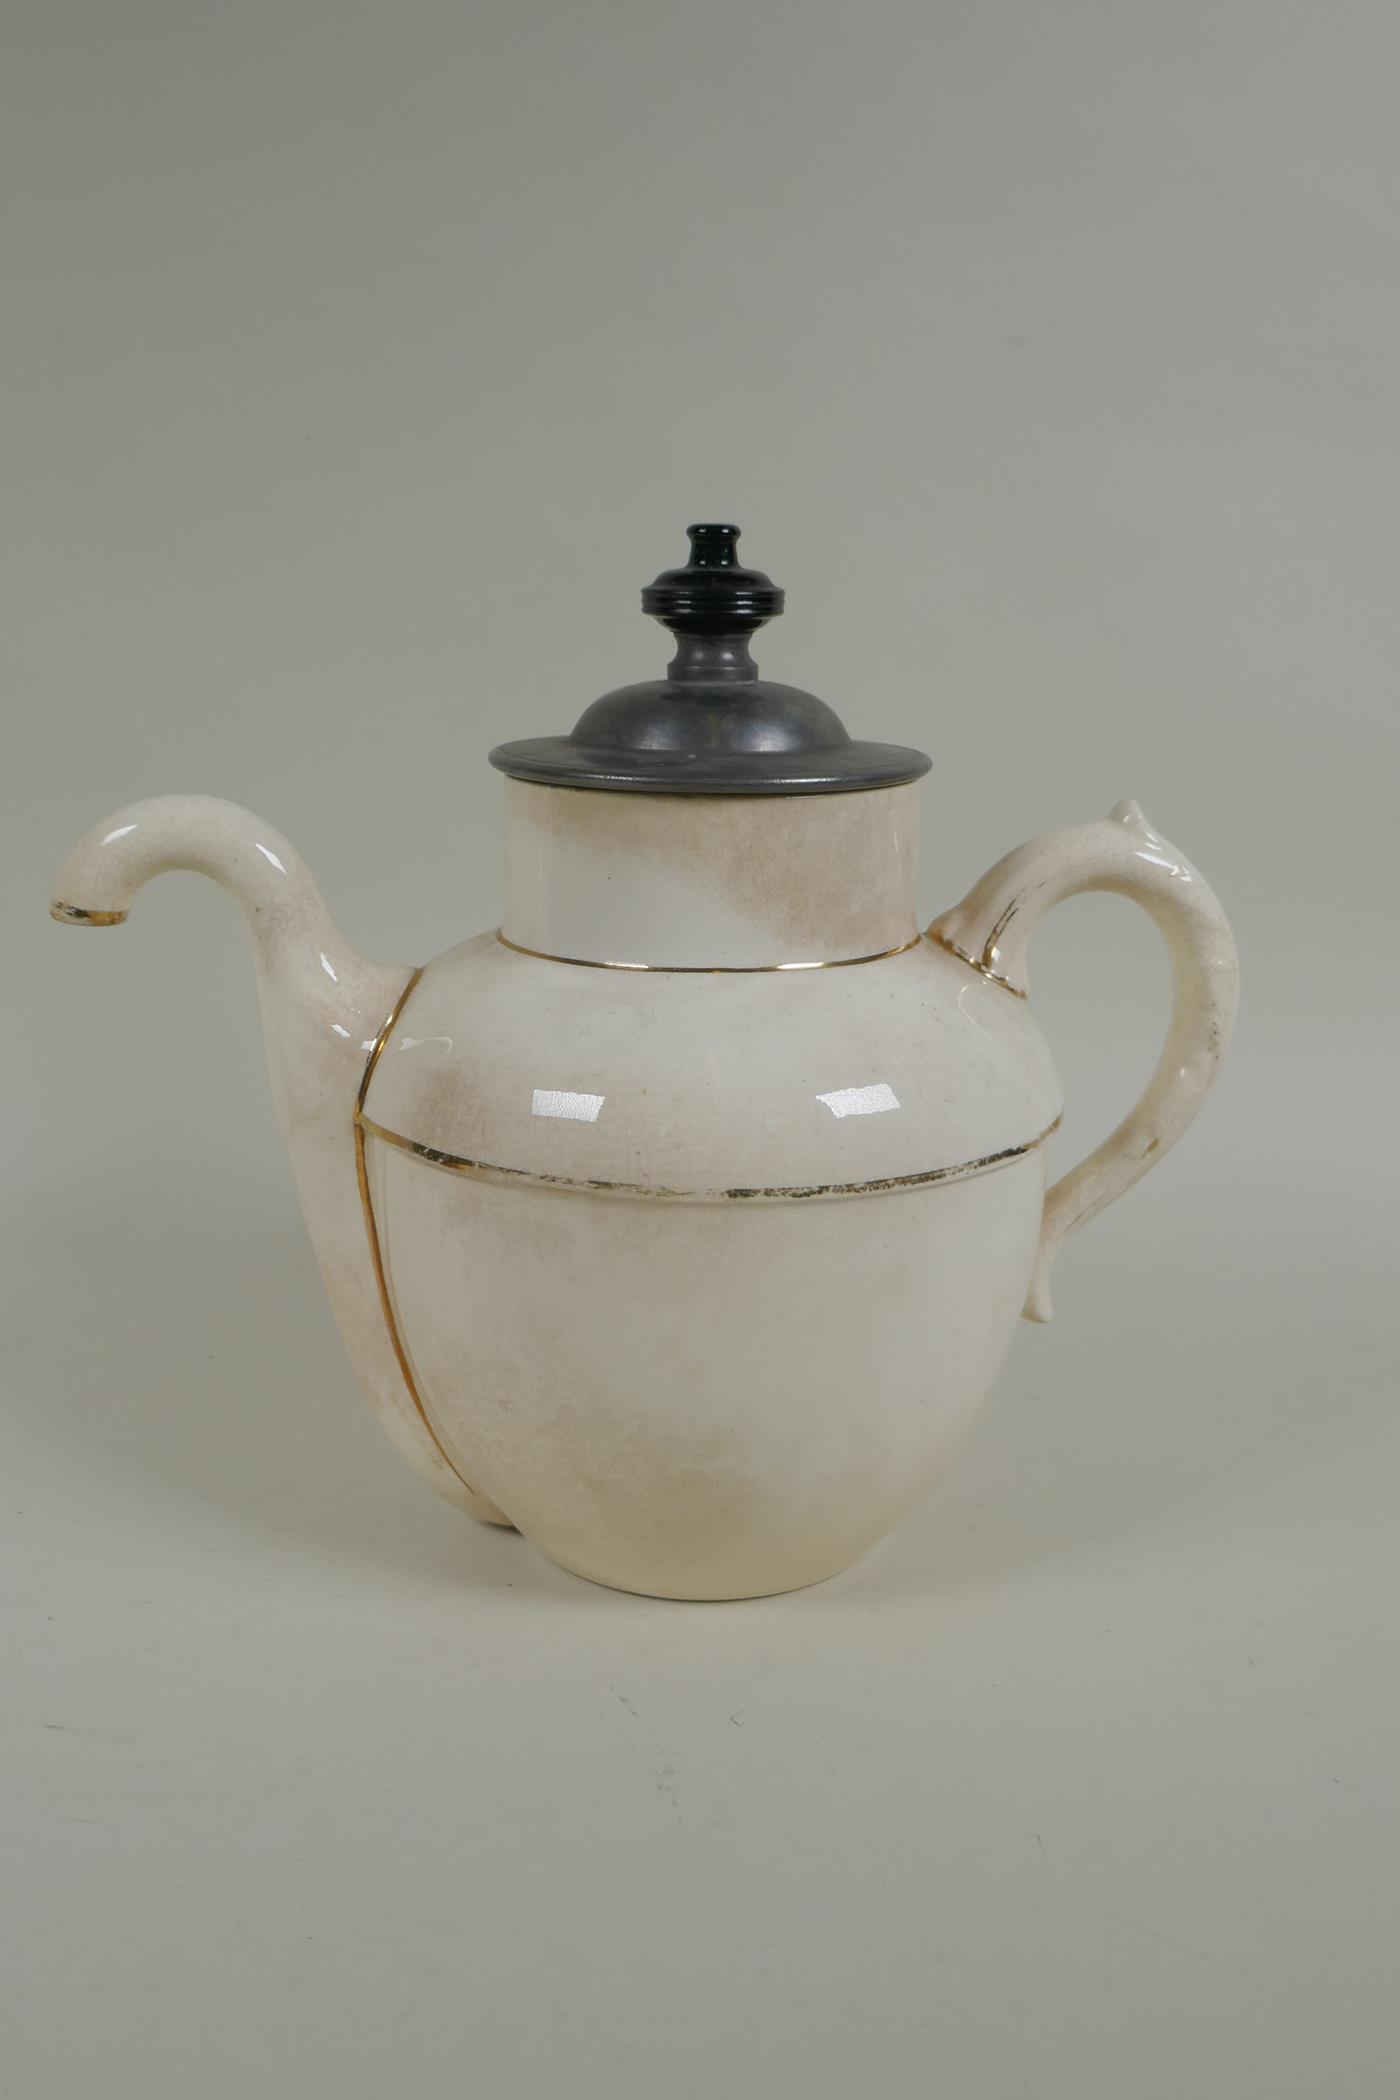 A C19th Burslem Royal patent self pouring teapot, an early stoneware mug with transfer decoration of - Image 2 of 9